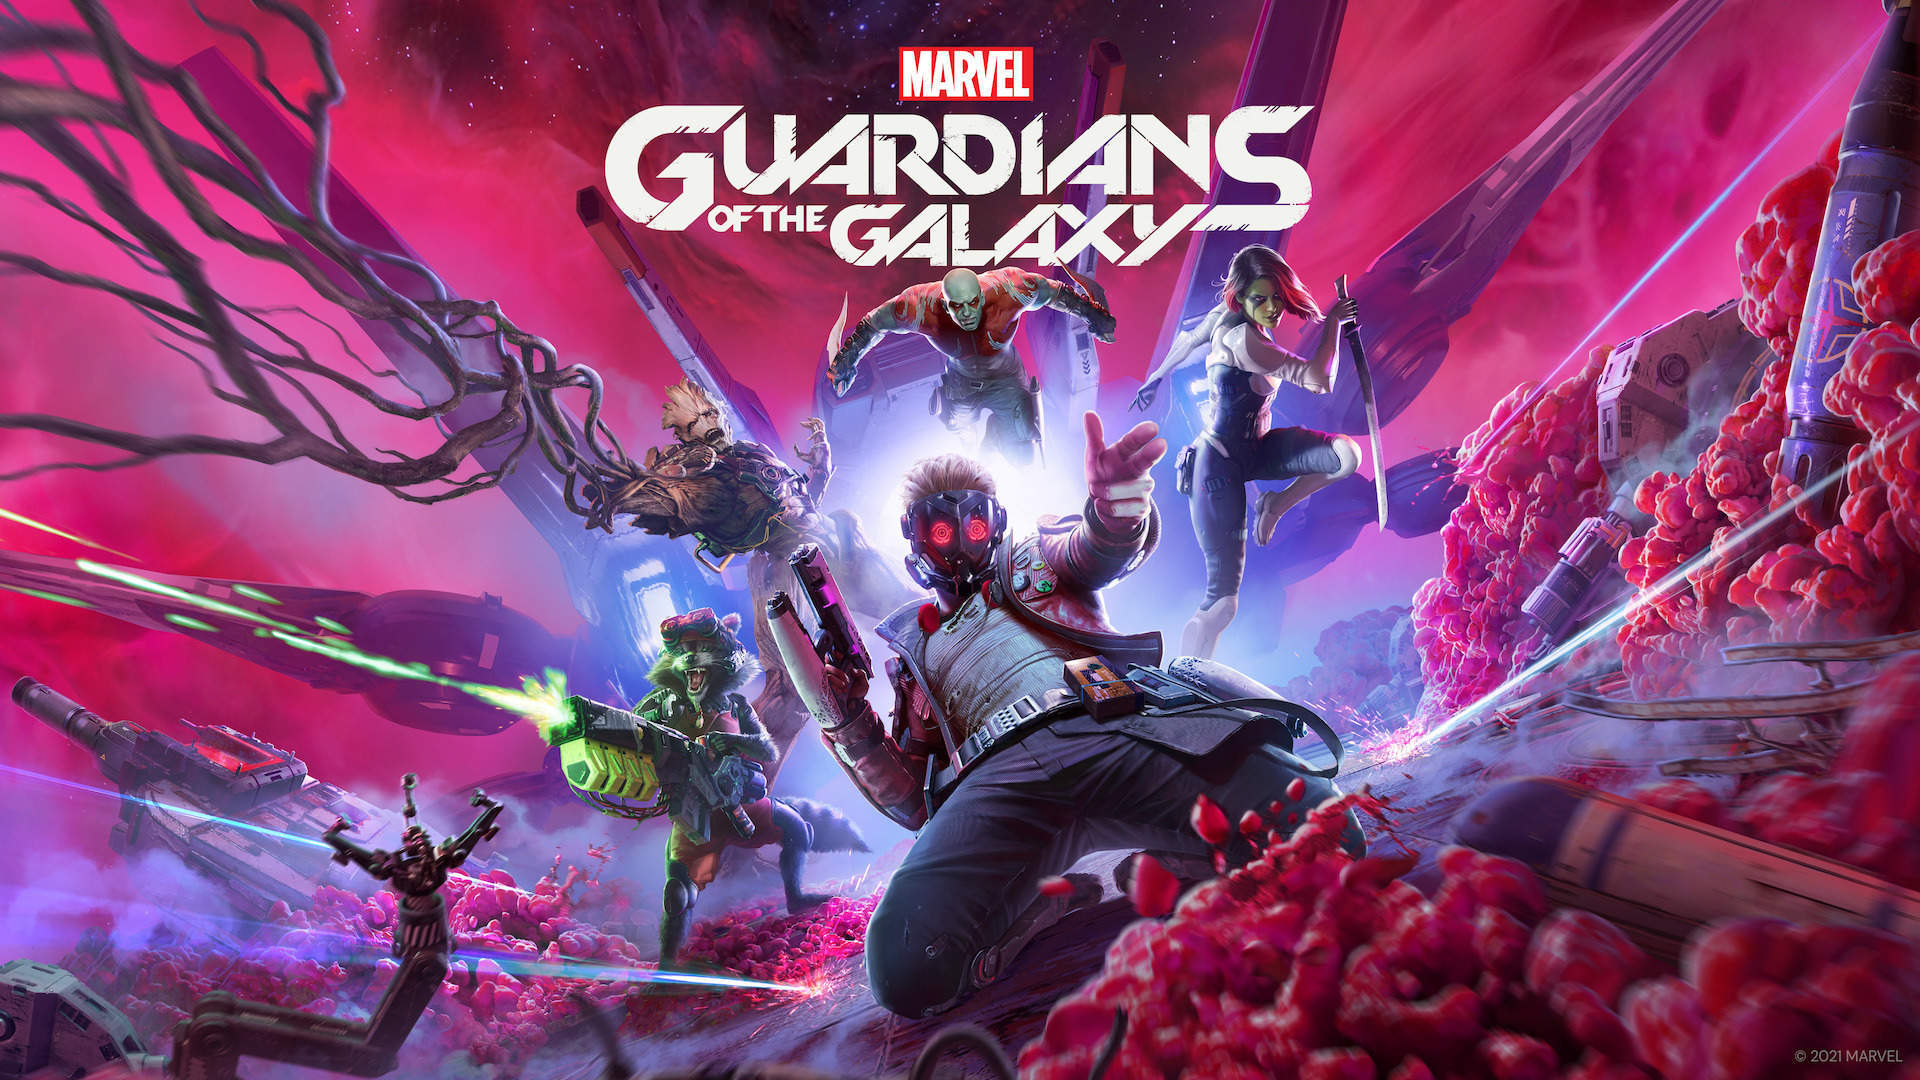 Marvels Guardians of the Galaxy Wallpaper